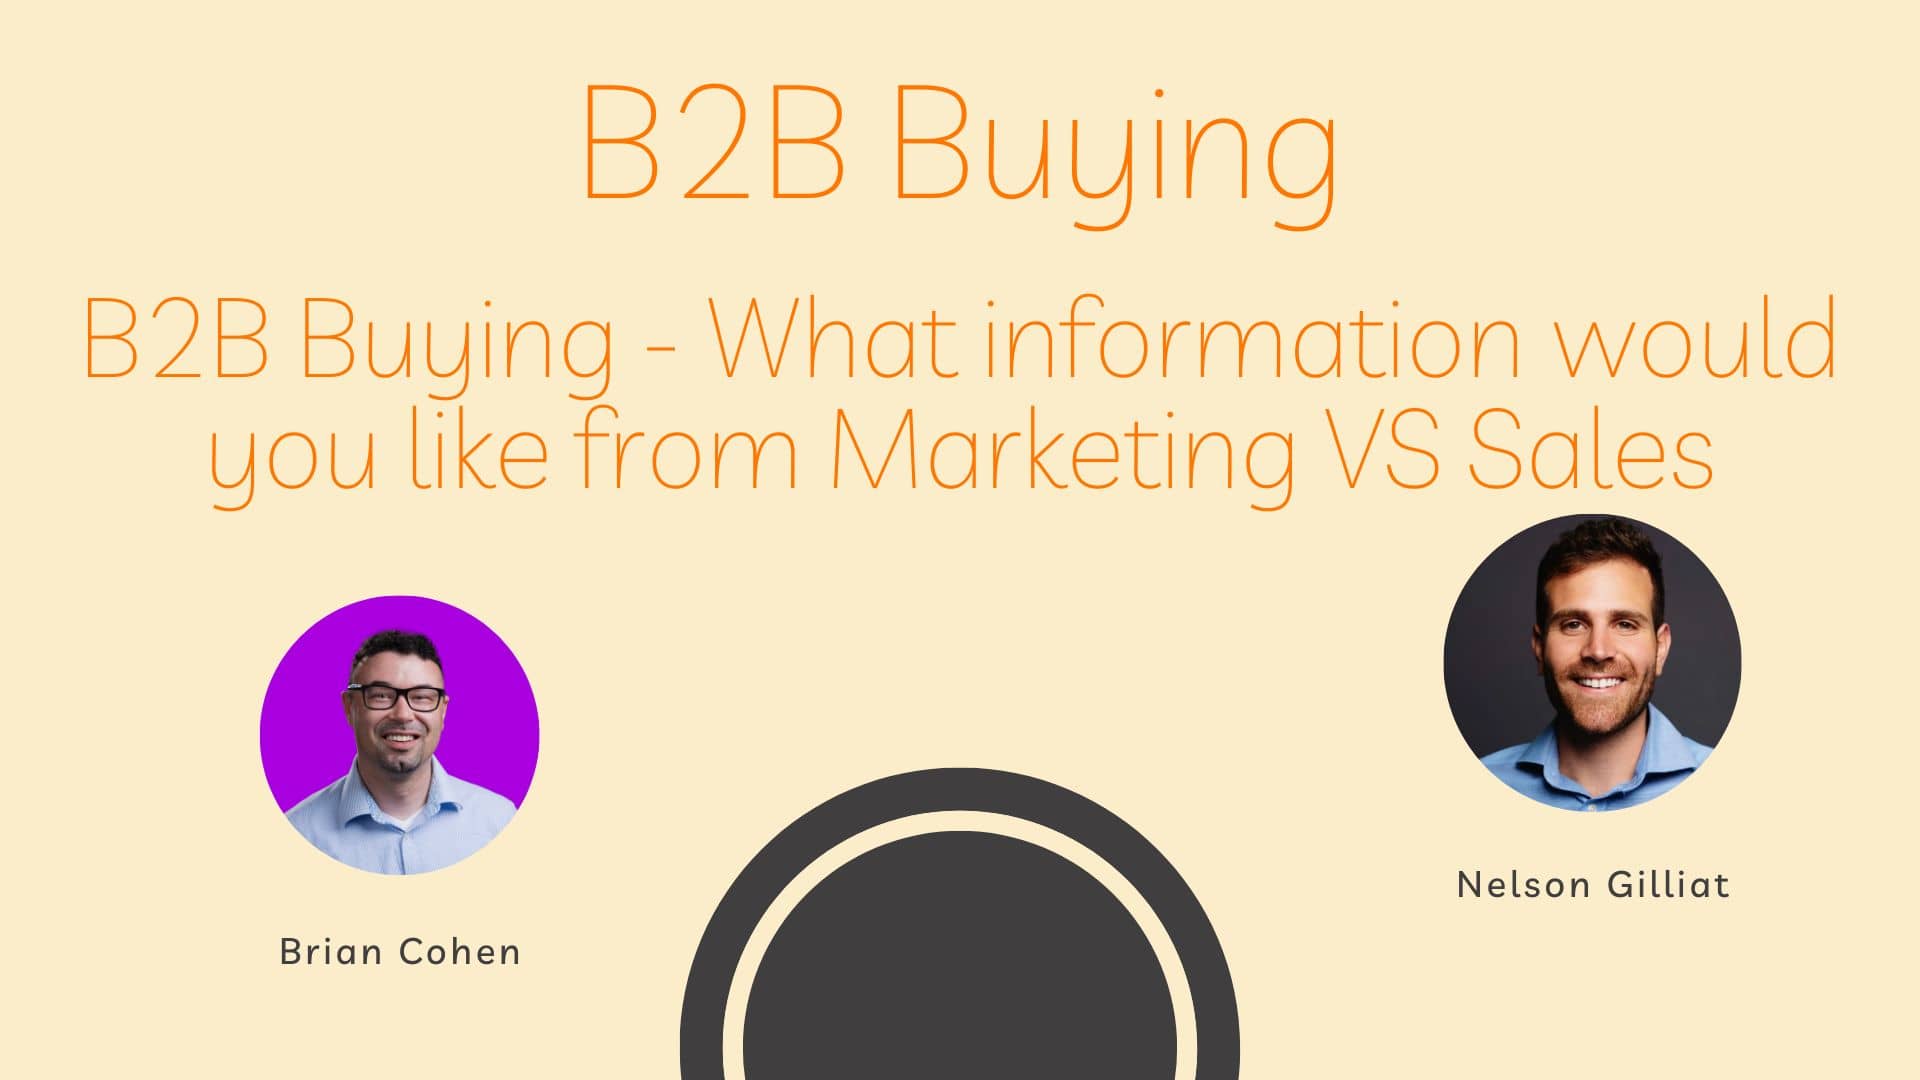 B2B Buying - What information would you like from Marketing VS Sales